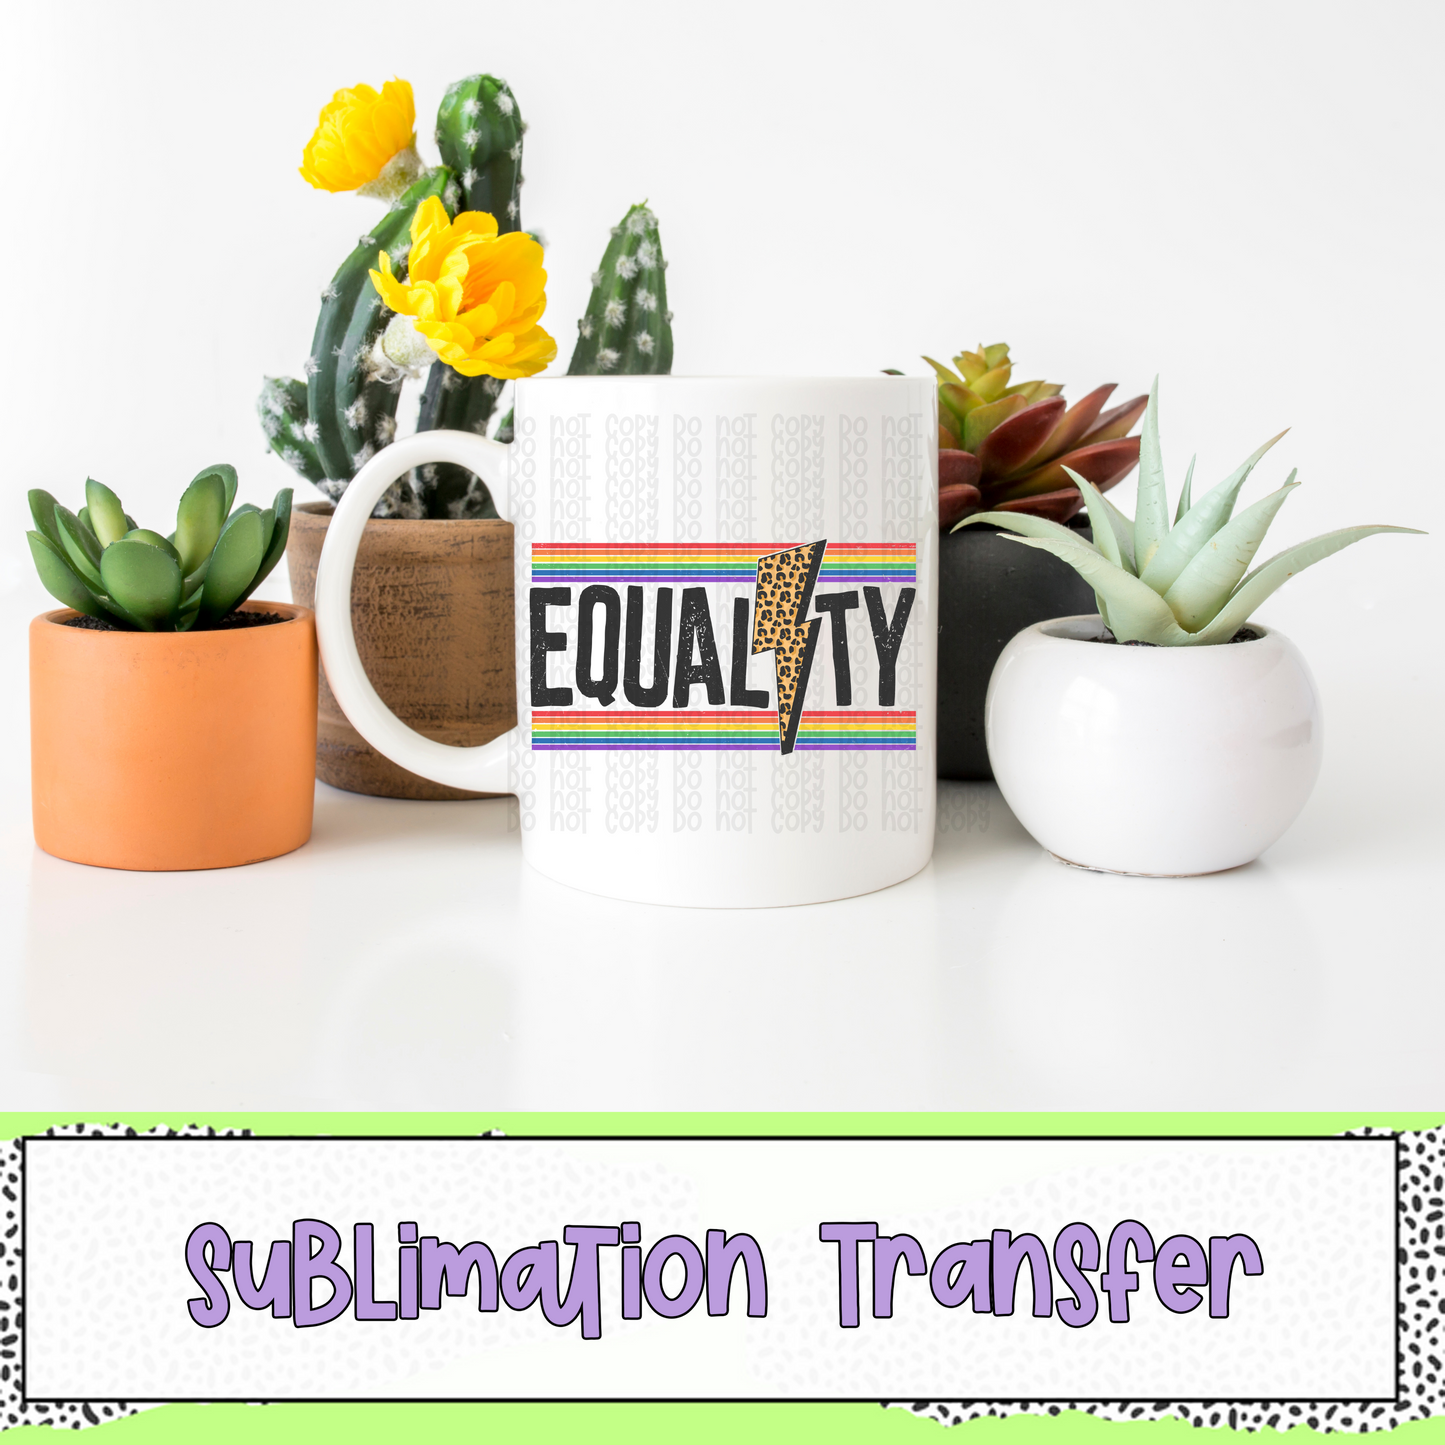 Equality - SUBLIMATION TRANSFER